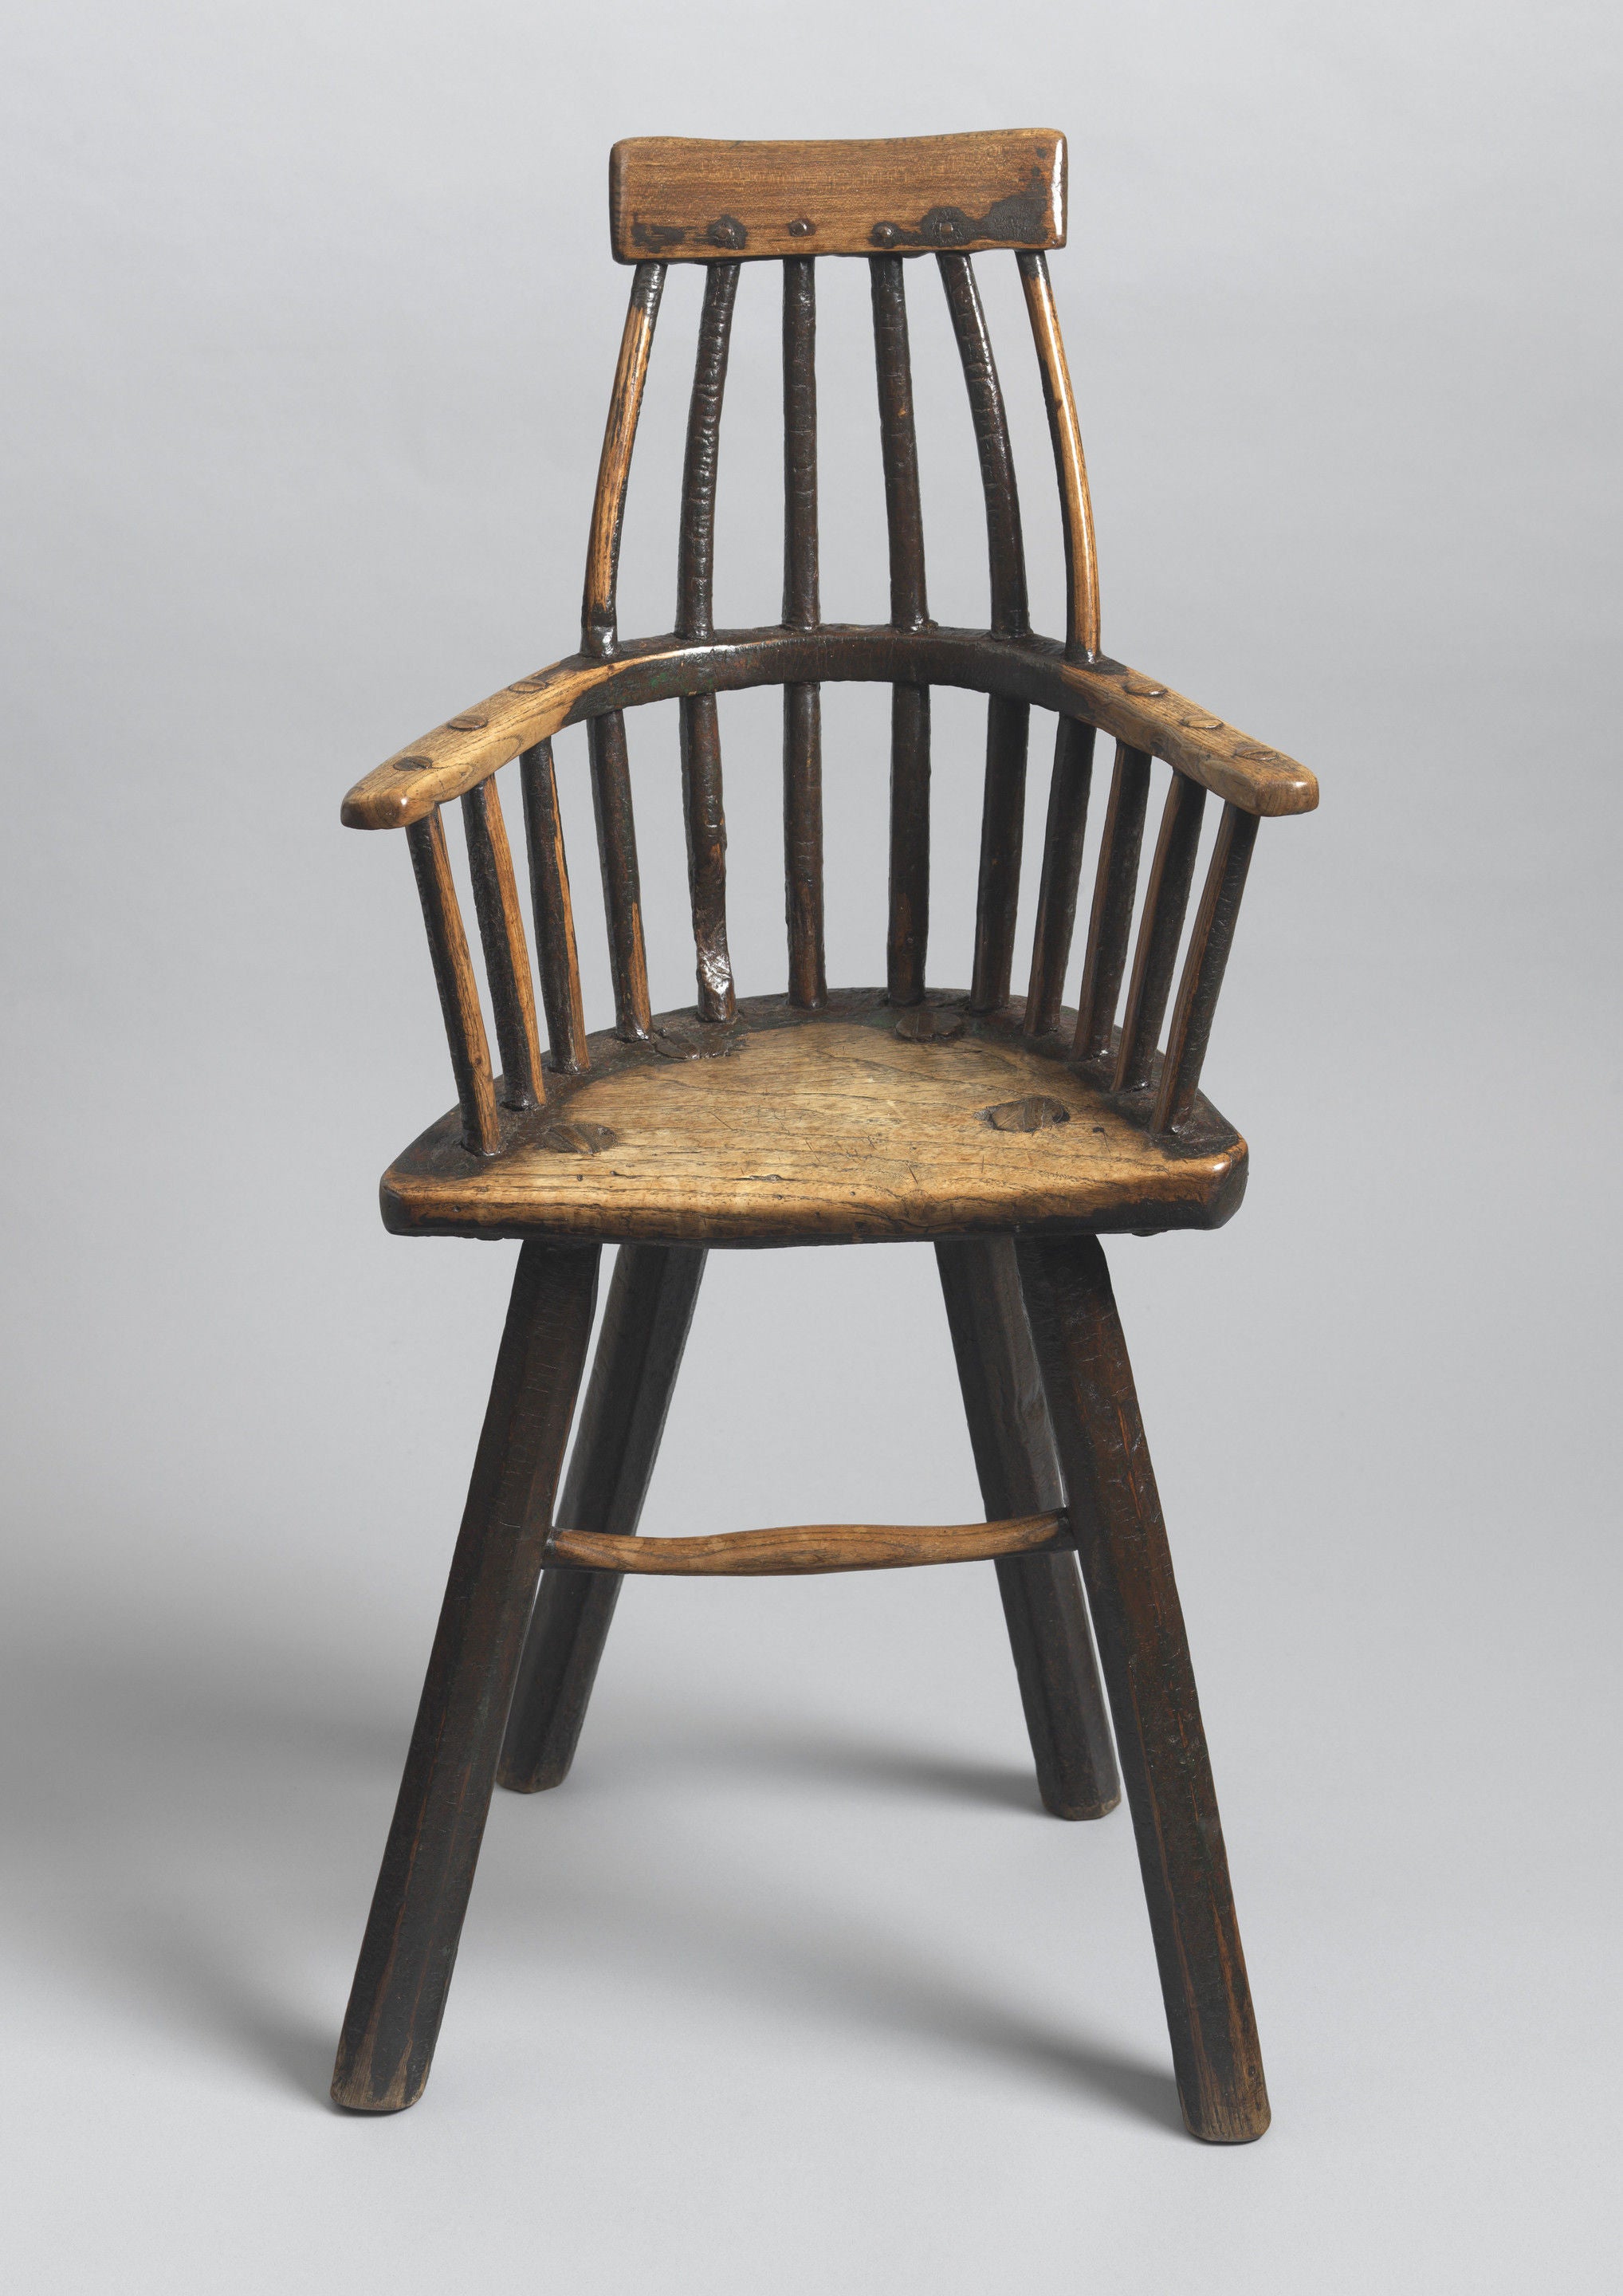 Exceptional Early  “Lobster  Pot” Form Child's Chair